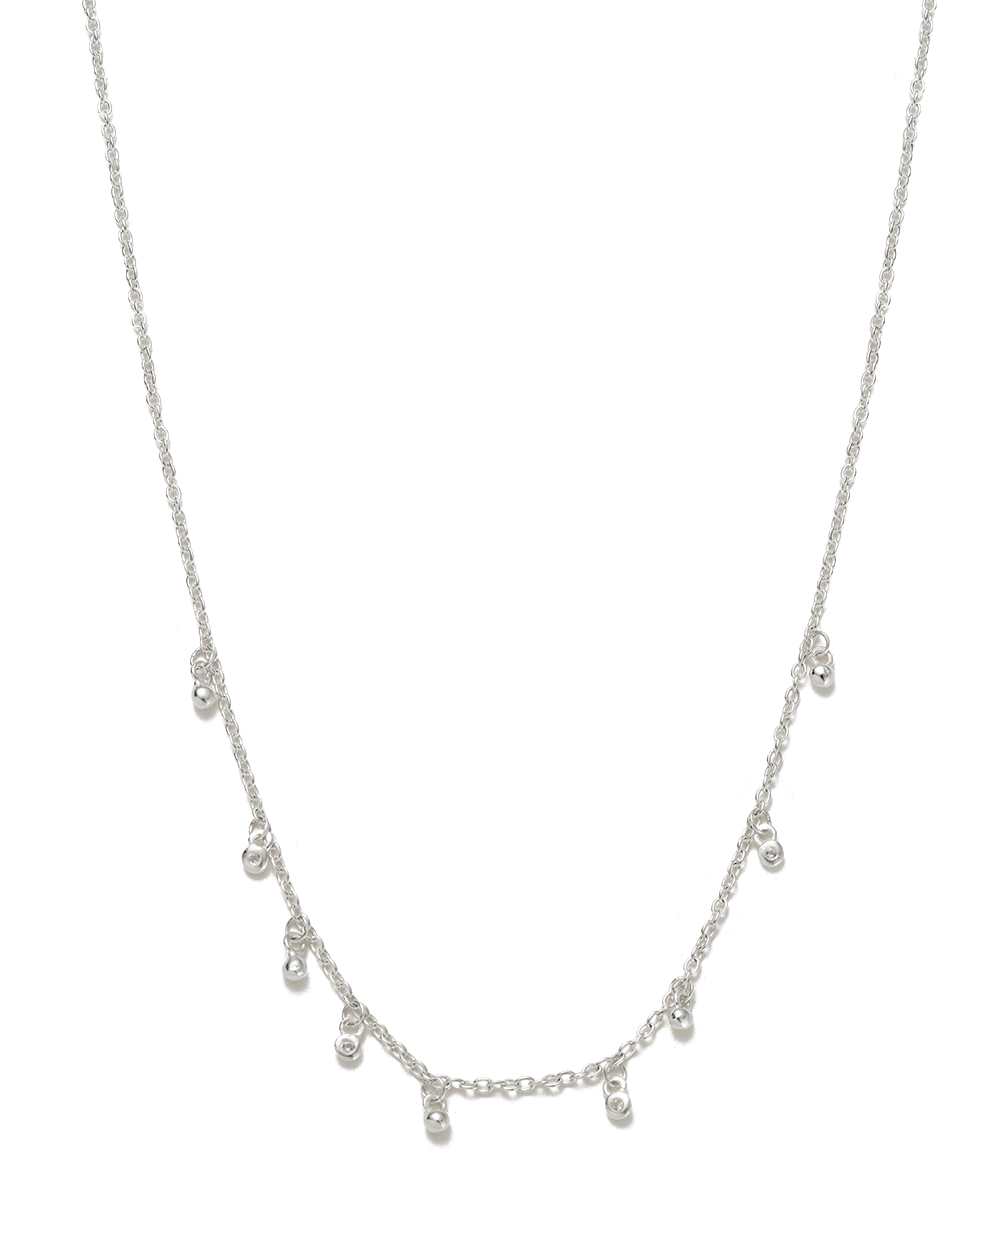 SEA MIST NECKLACE (STERLING SILVER) - IMAGE 1